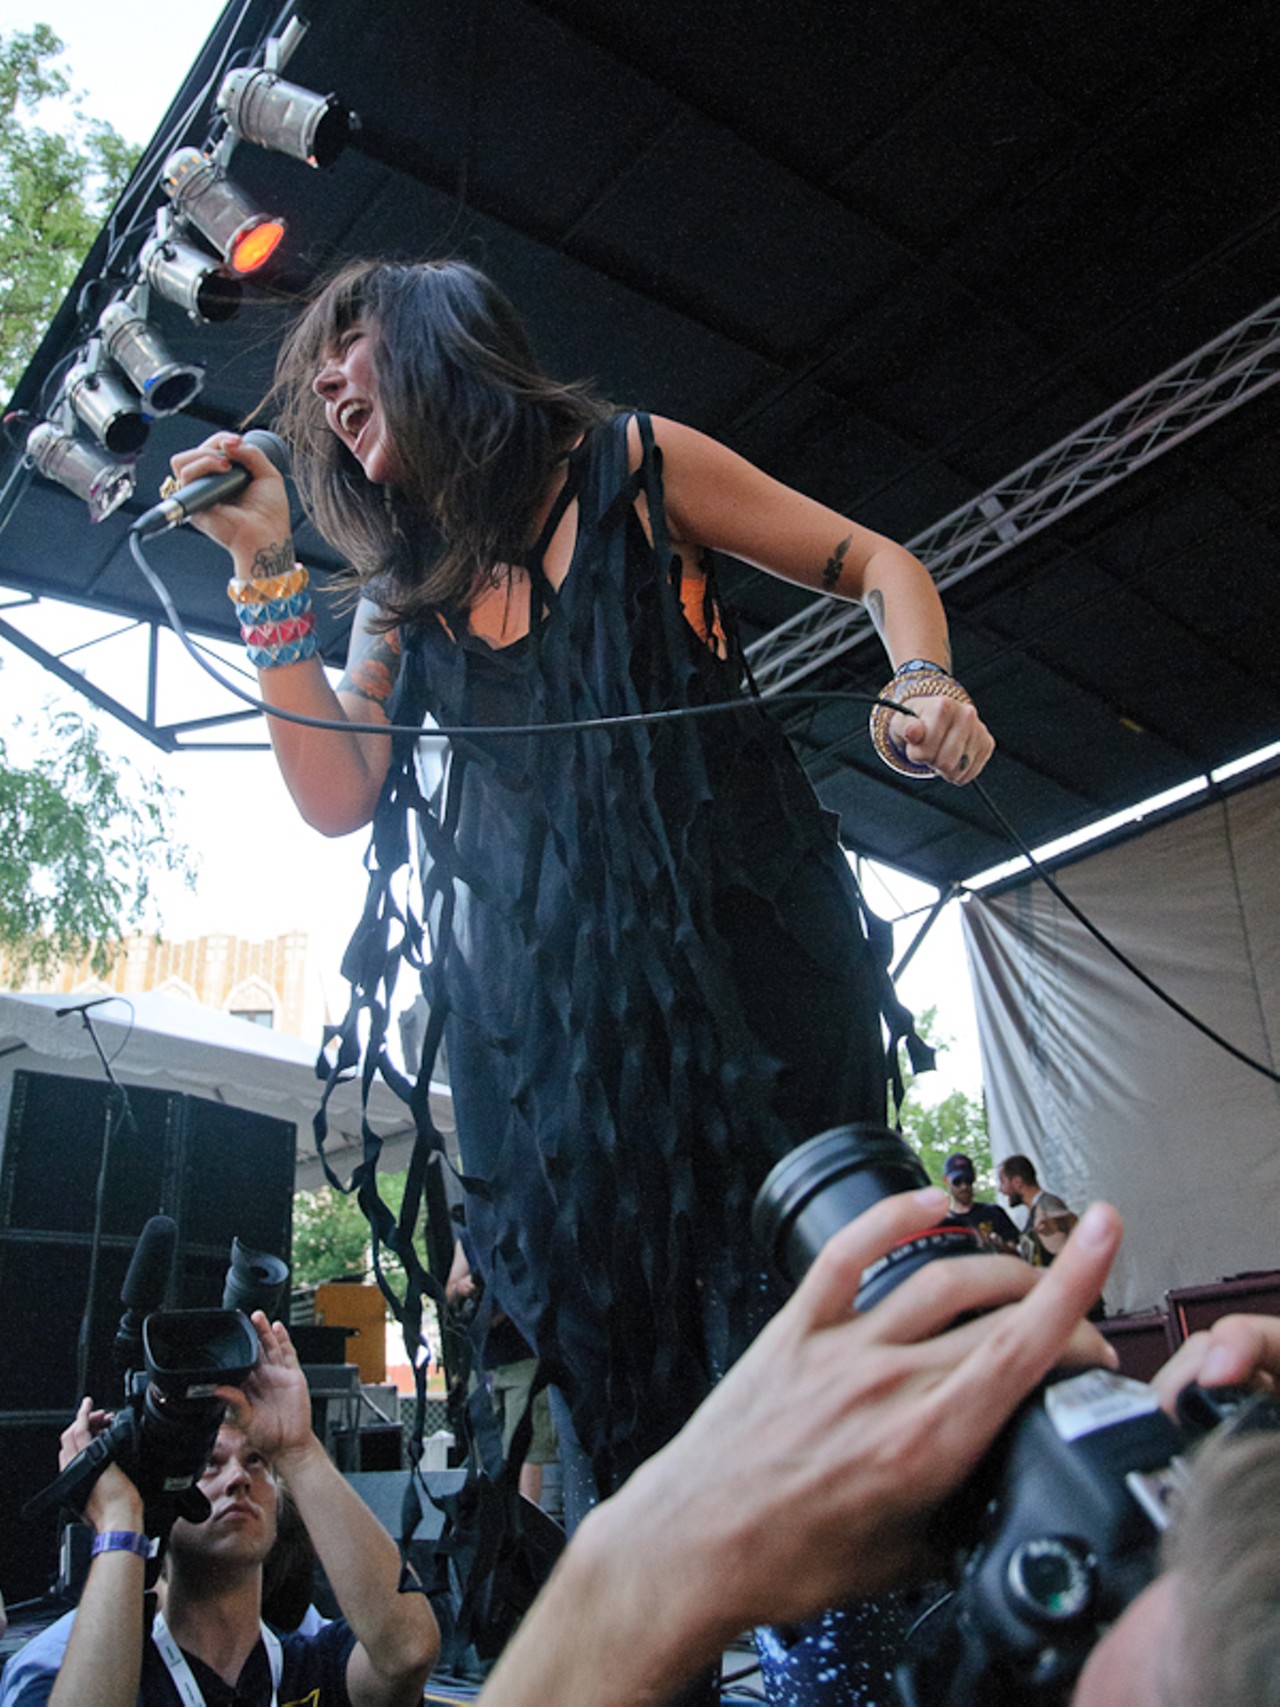 Sleigh Bells at the Pitchfork Music Festival 2010 in Chicago.